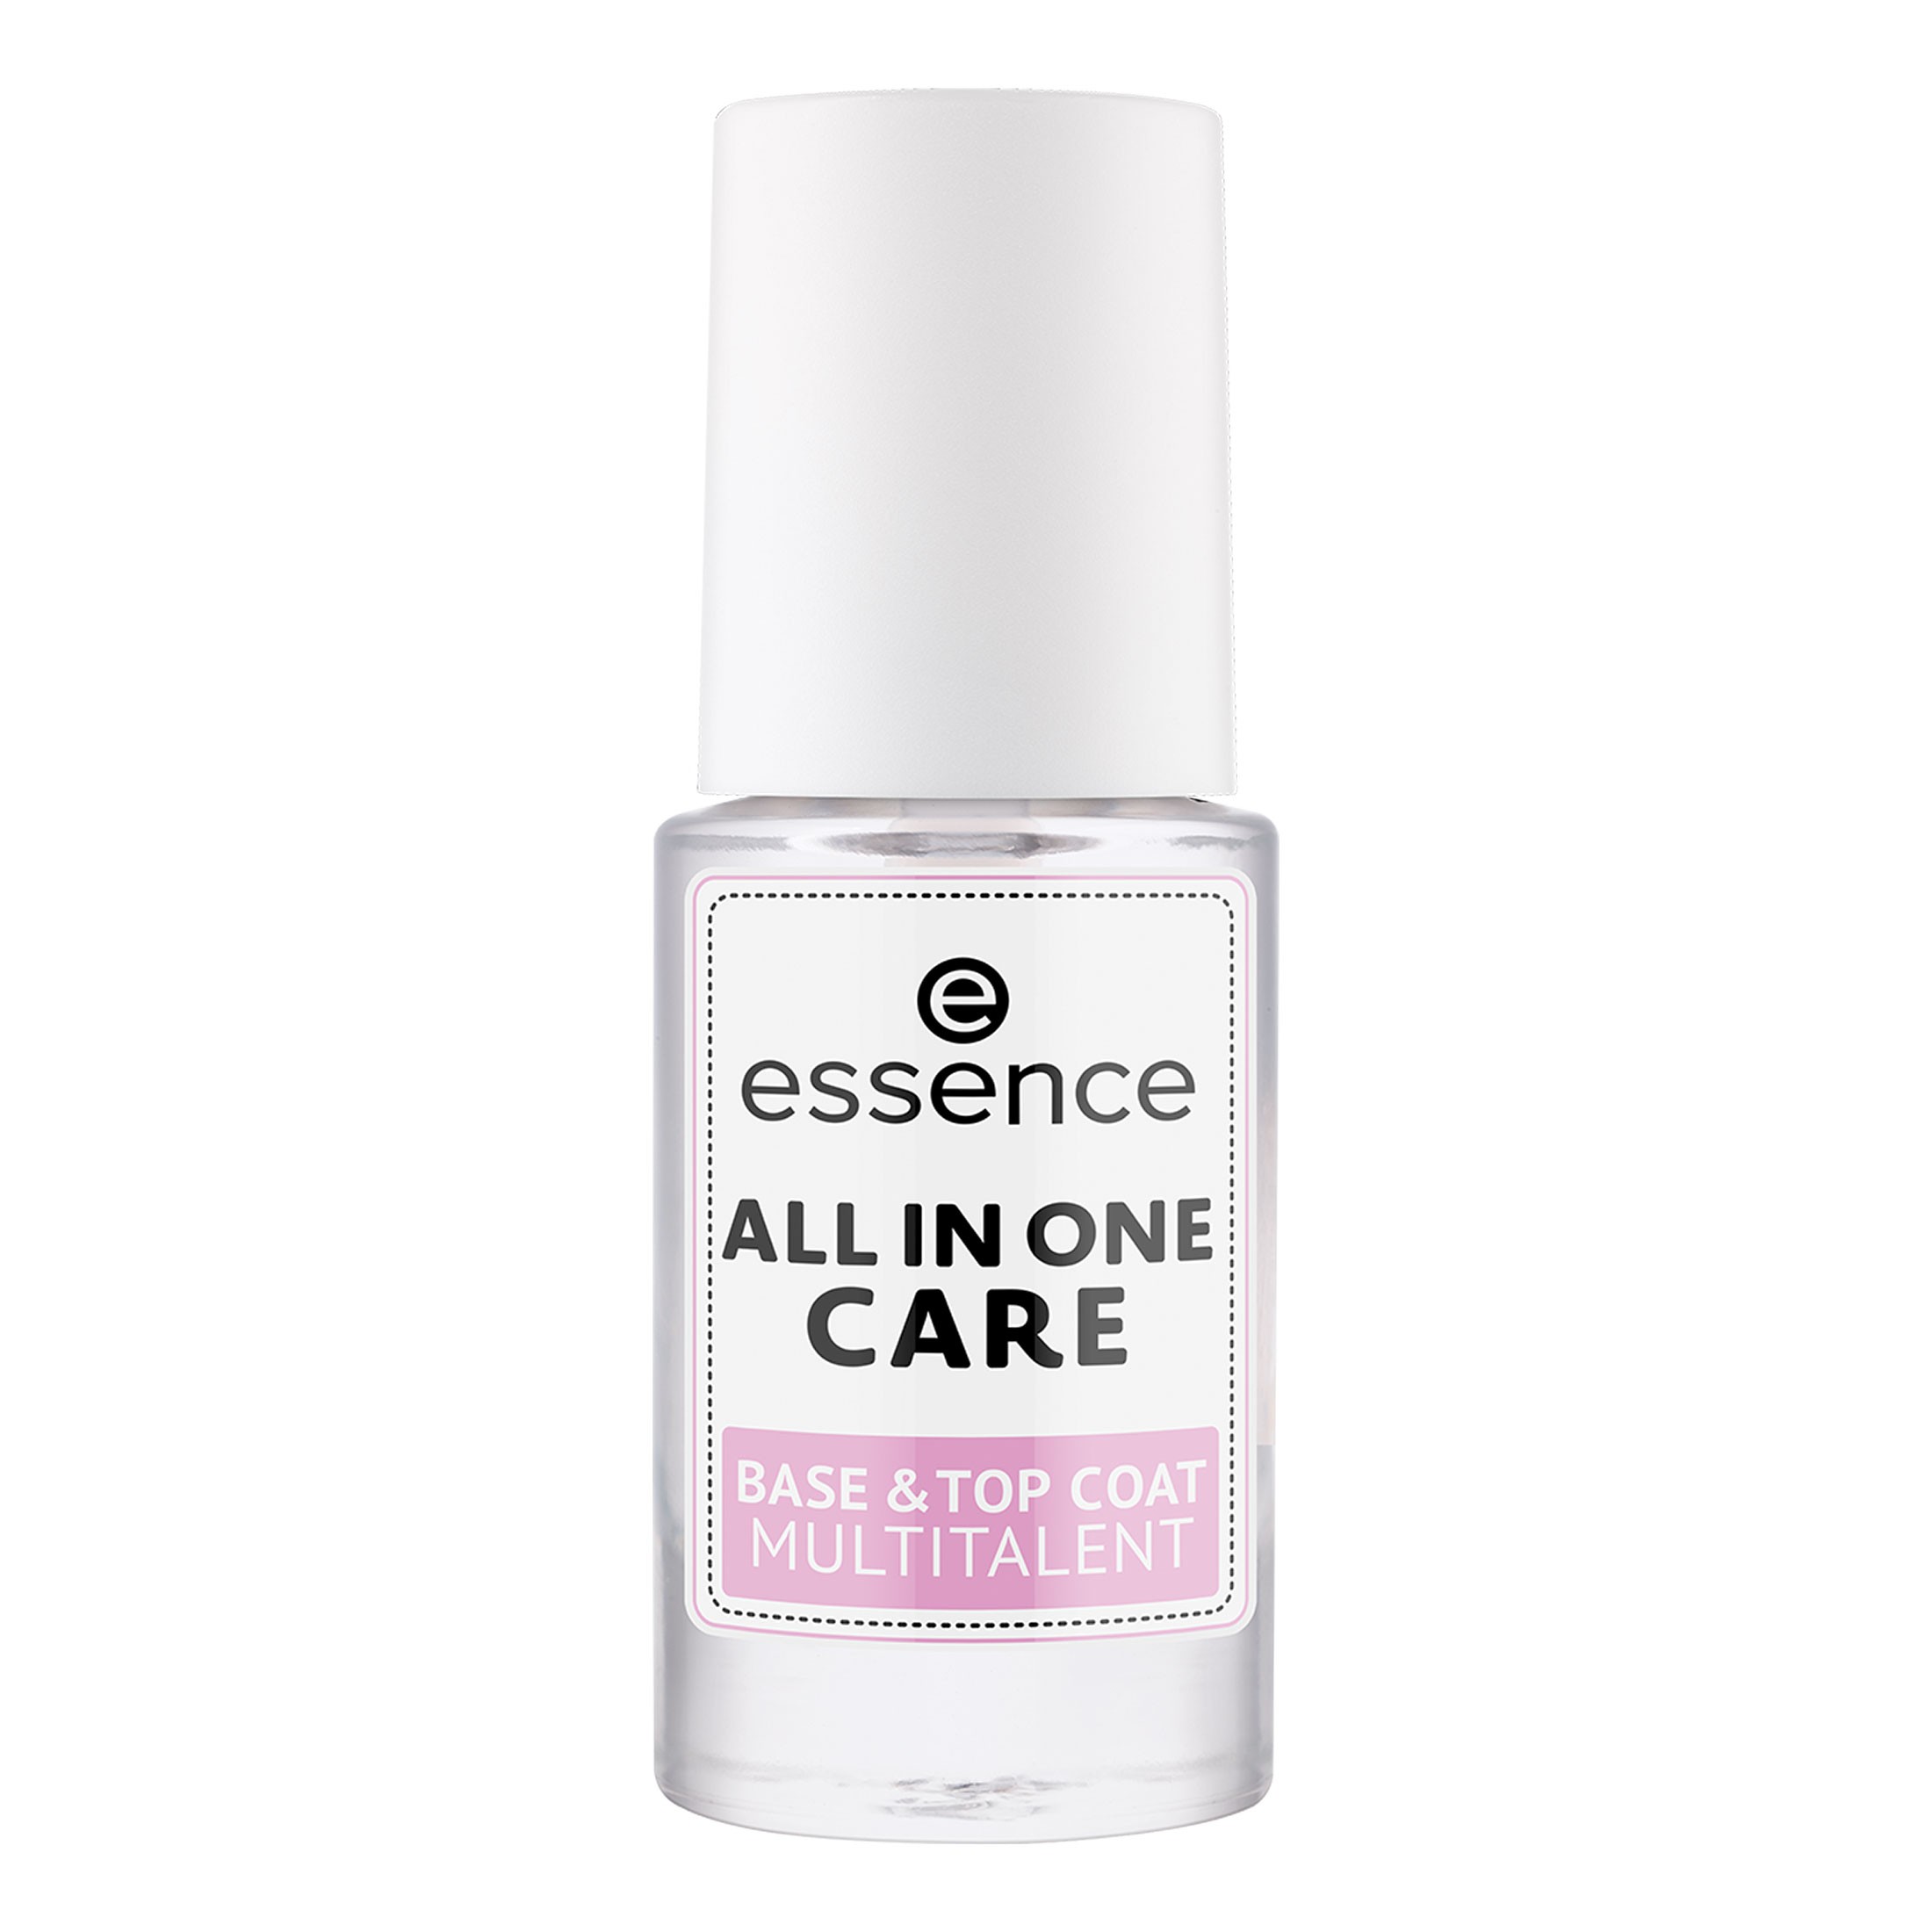 All In One Care - Base & Top Coat - Multitalent